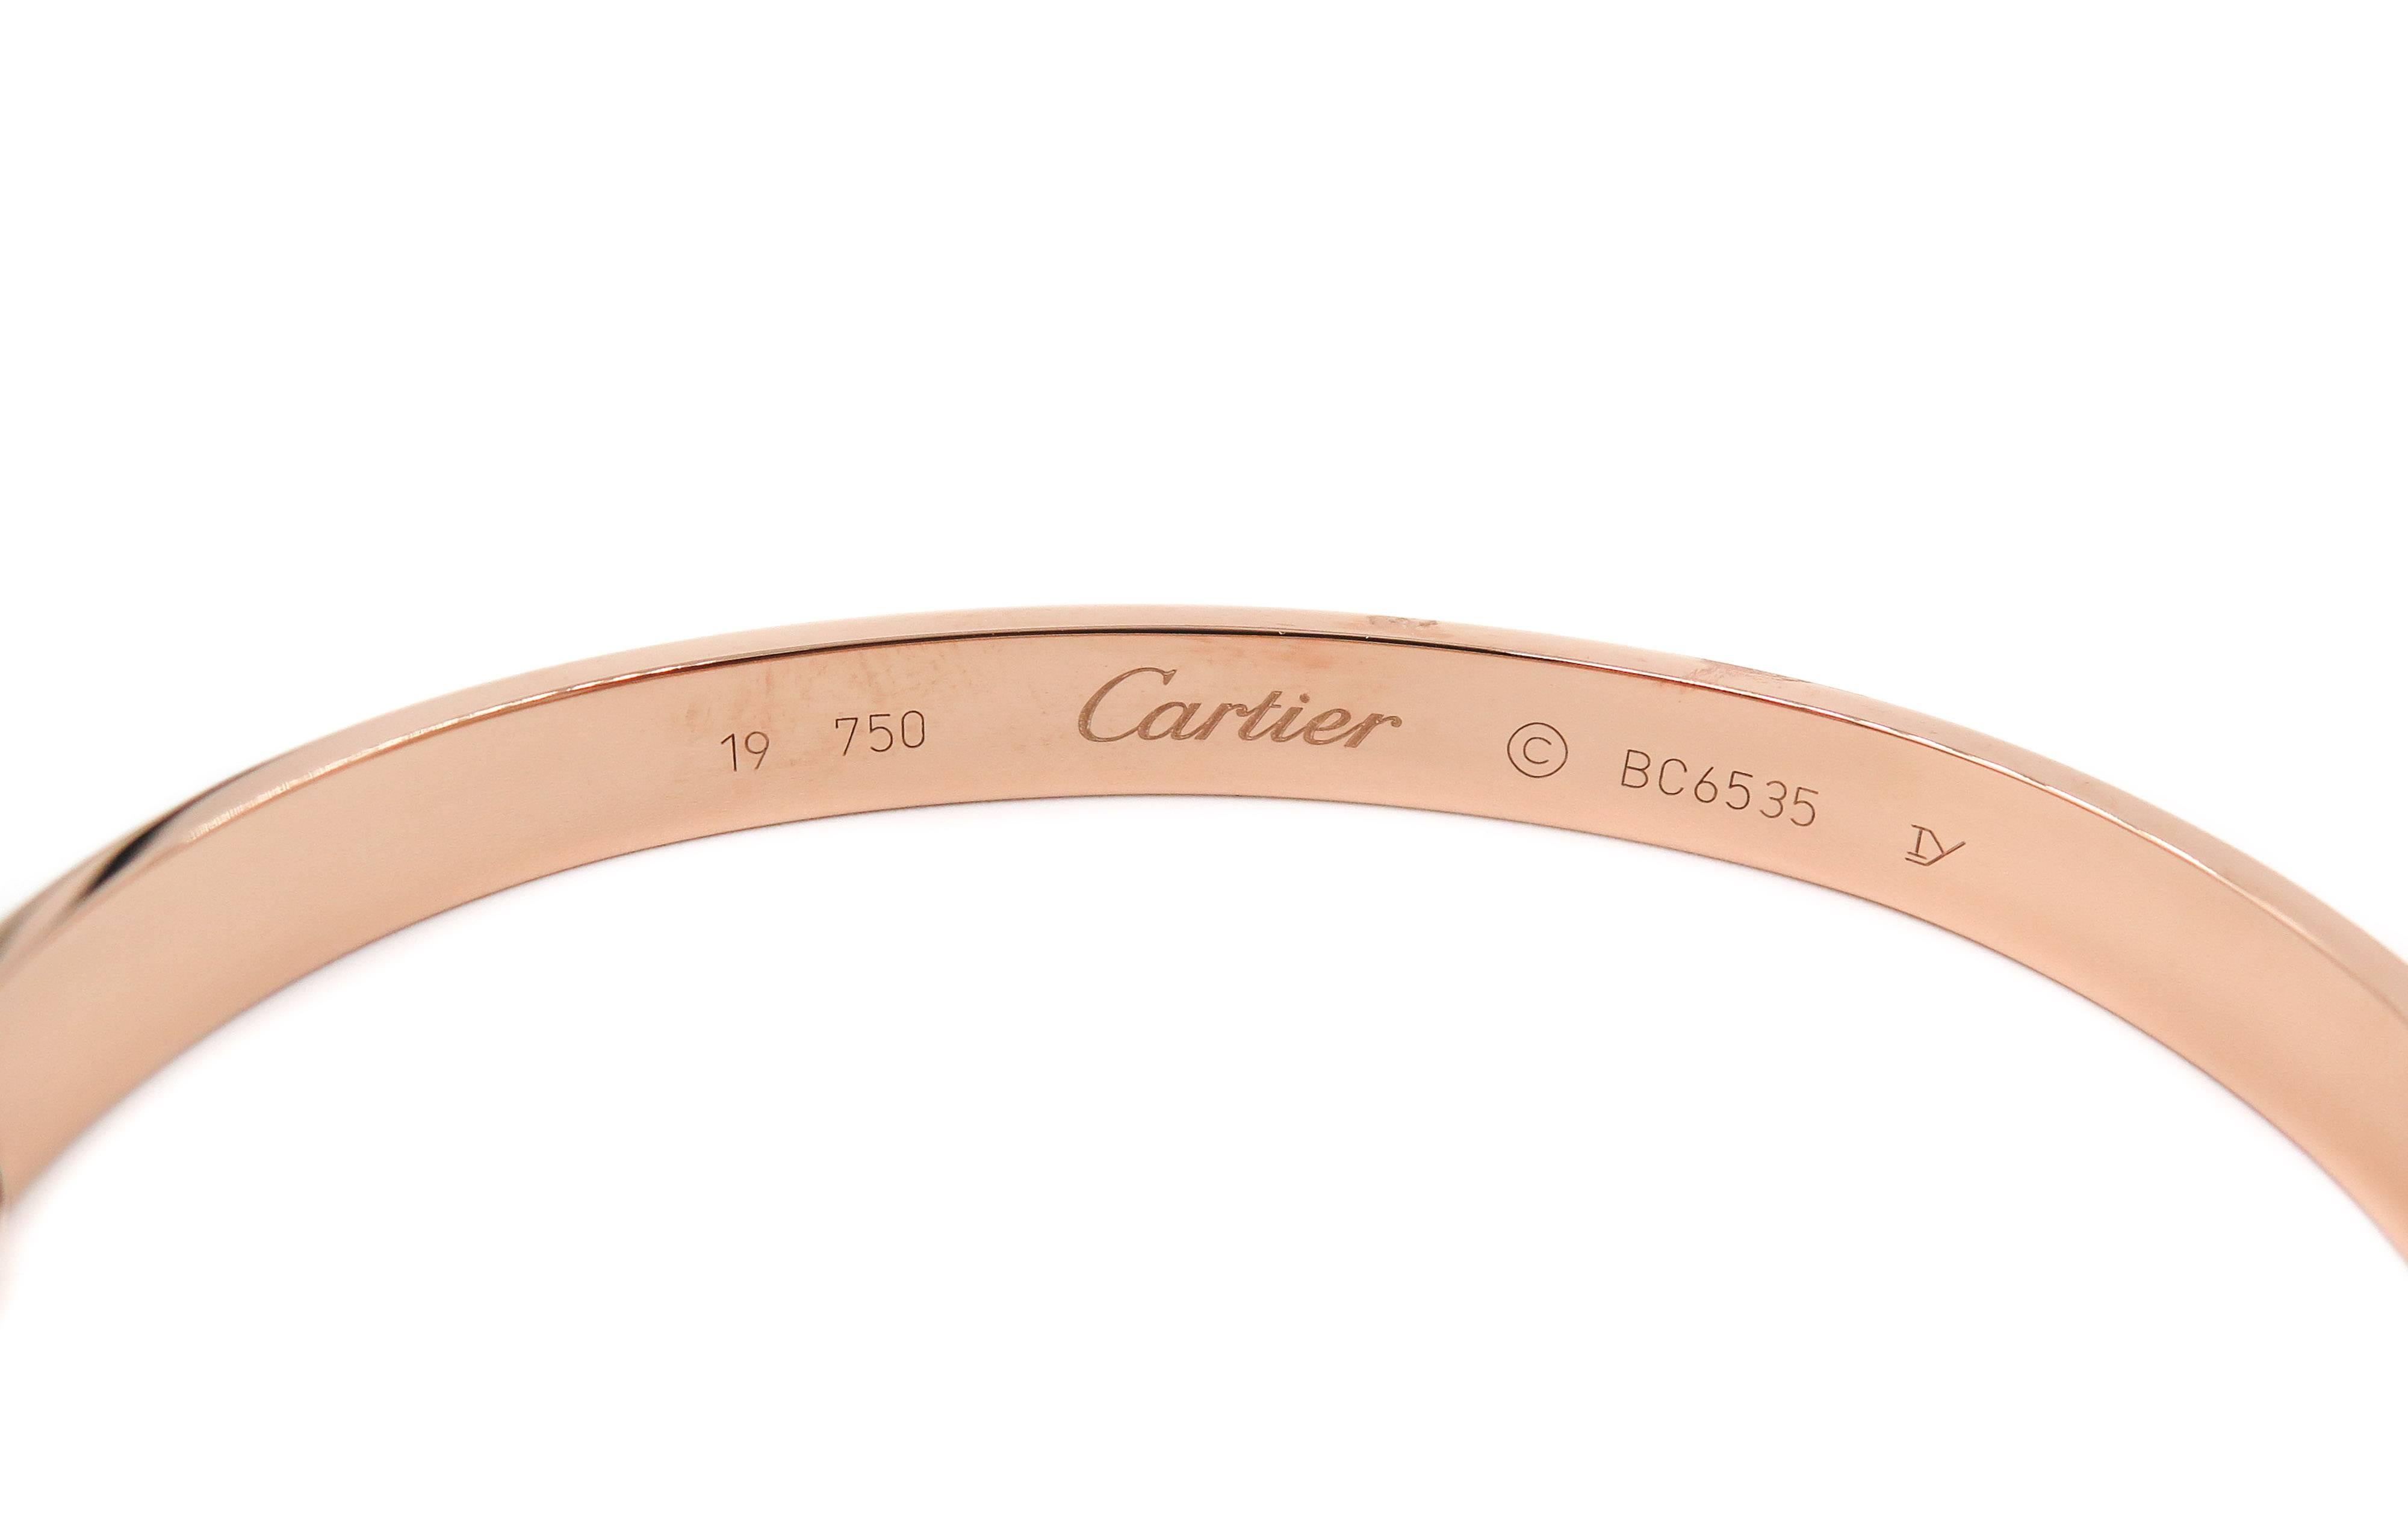 This bracelet is a universal symbol of Love and commitment. 
The Love bracelet, was created in the 1970s by Cartier, and became iconic!!
Designed in 18k Rose Gold as a flat bangle bracelet studded with screws that locks to the wrist, opened and